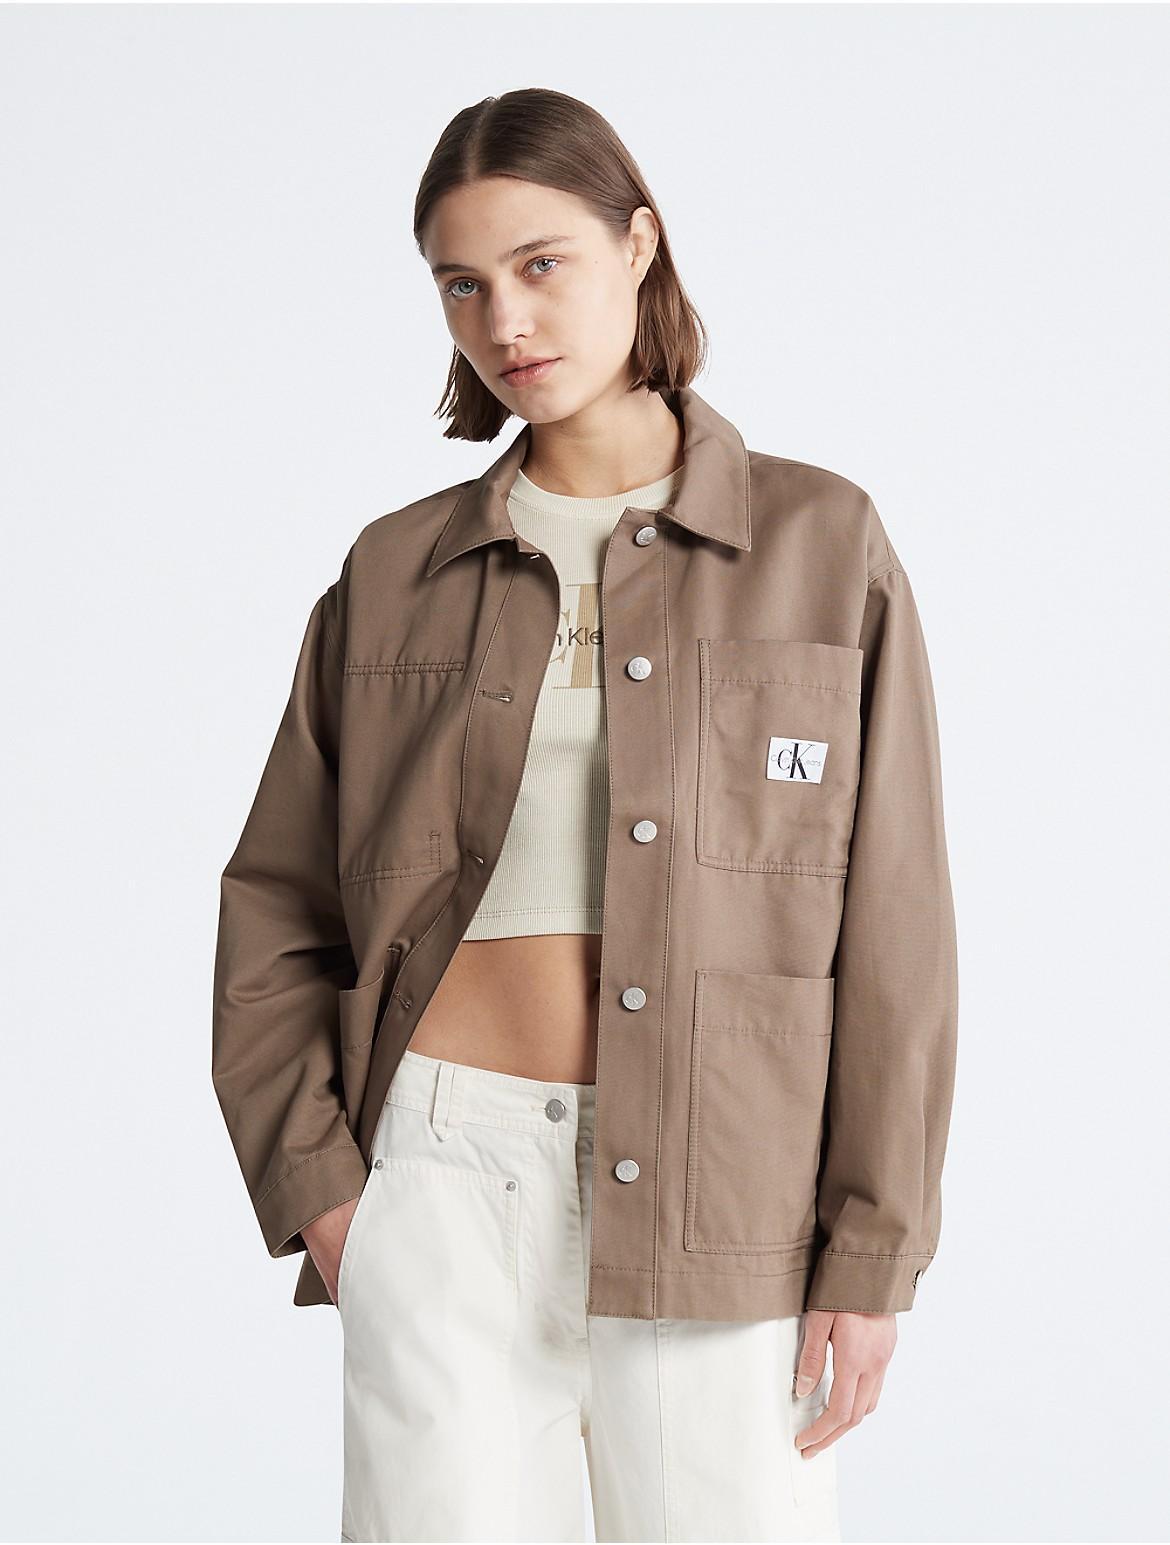 Calvin Klein Women's Relaxed Utility Shirt Jacket - Brown - XL Product Image